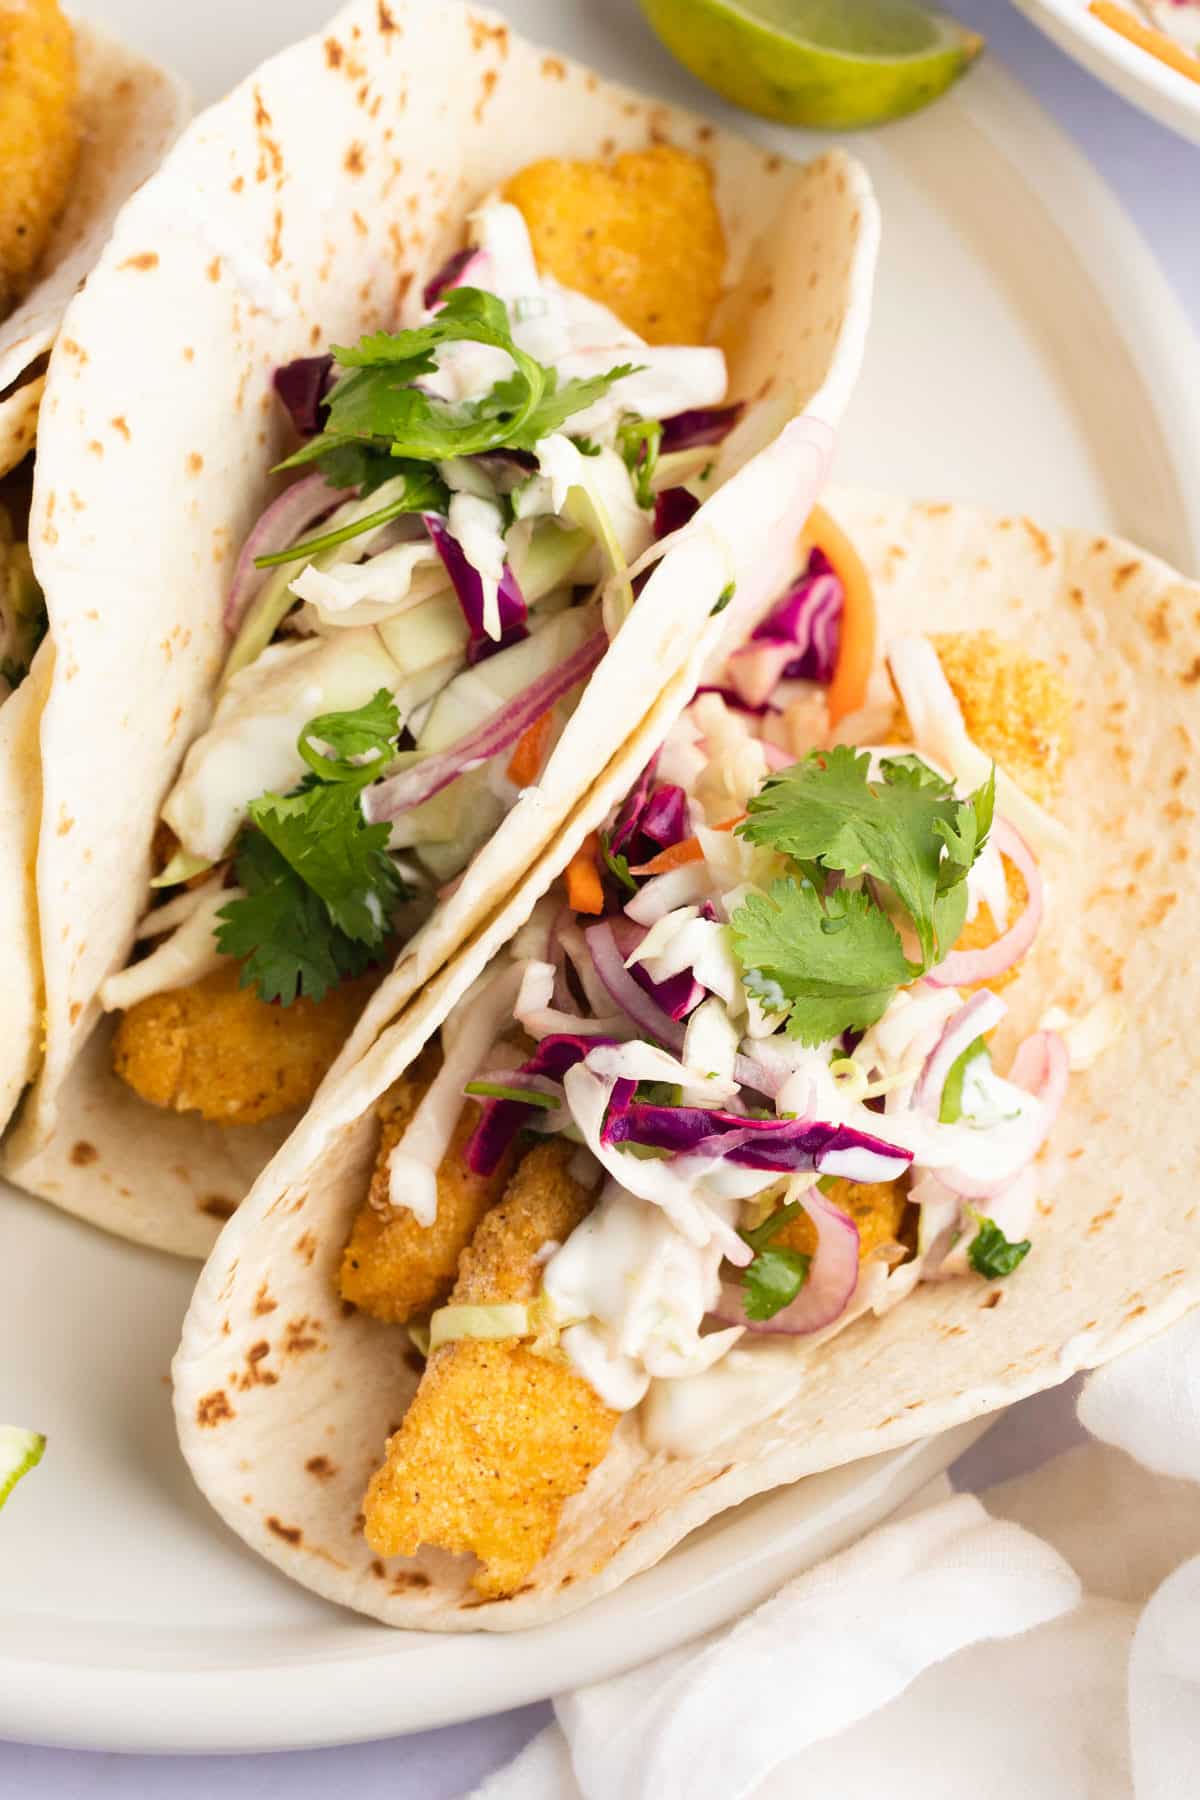 Fish tacos topped with slaw and lime crema.